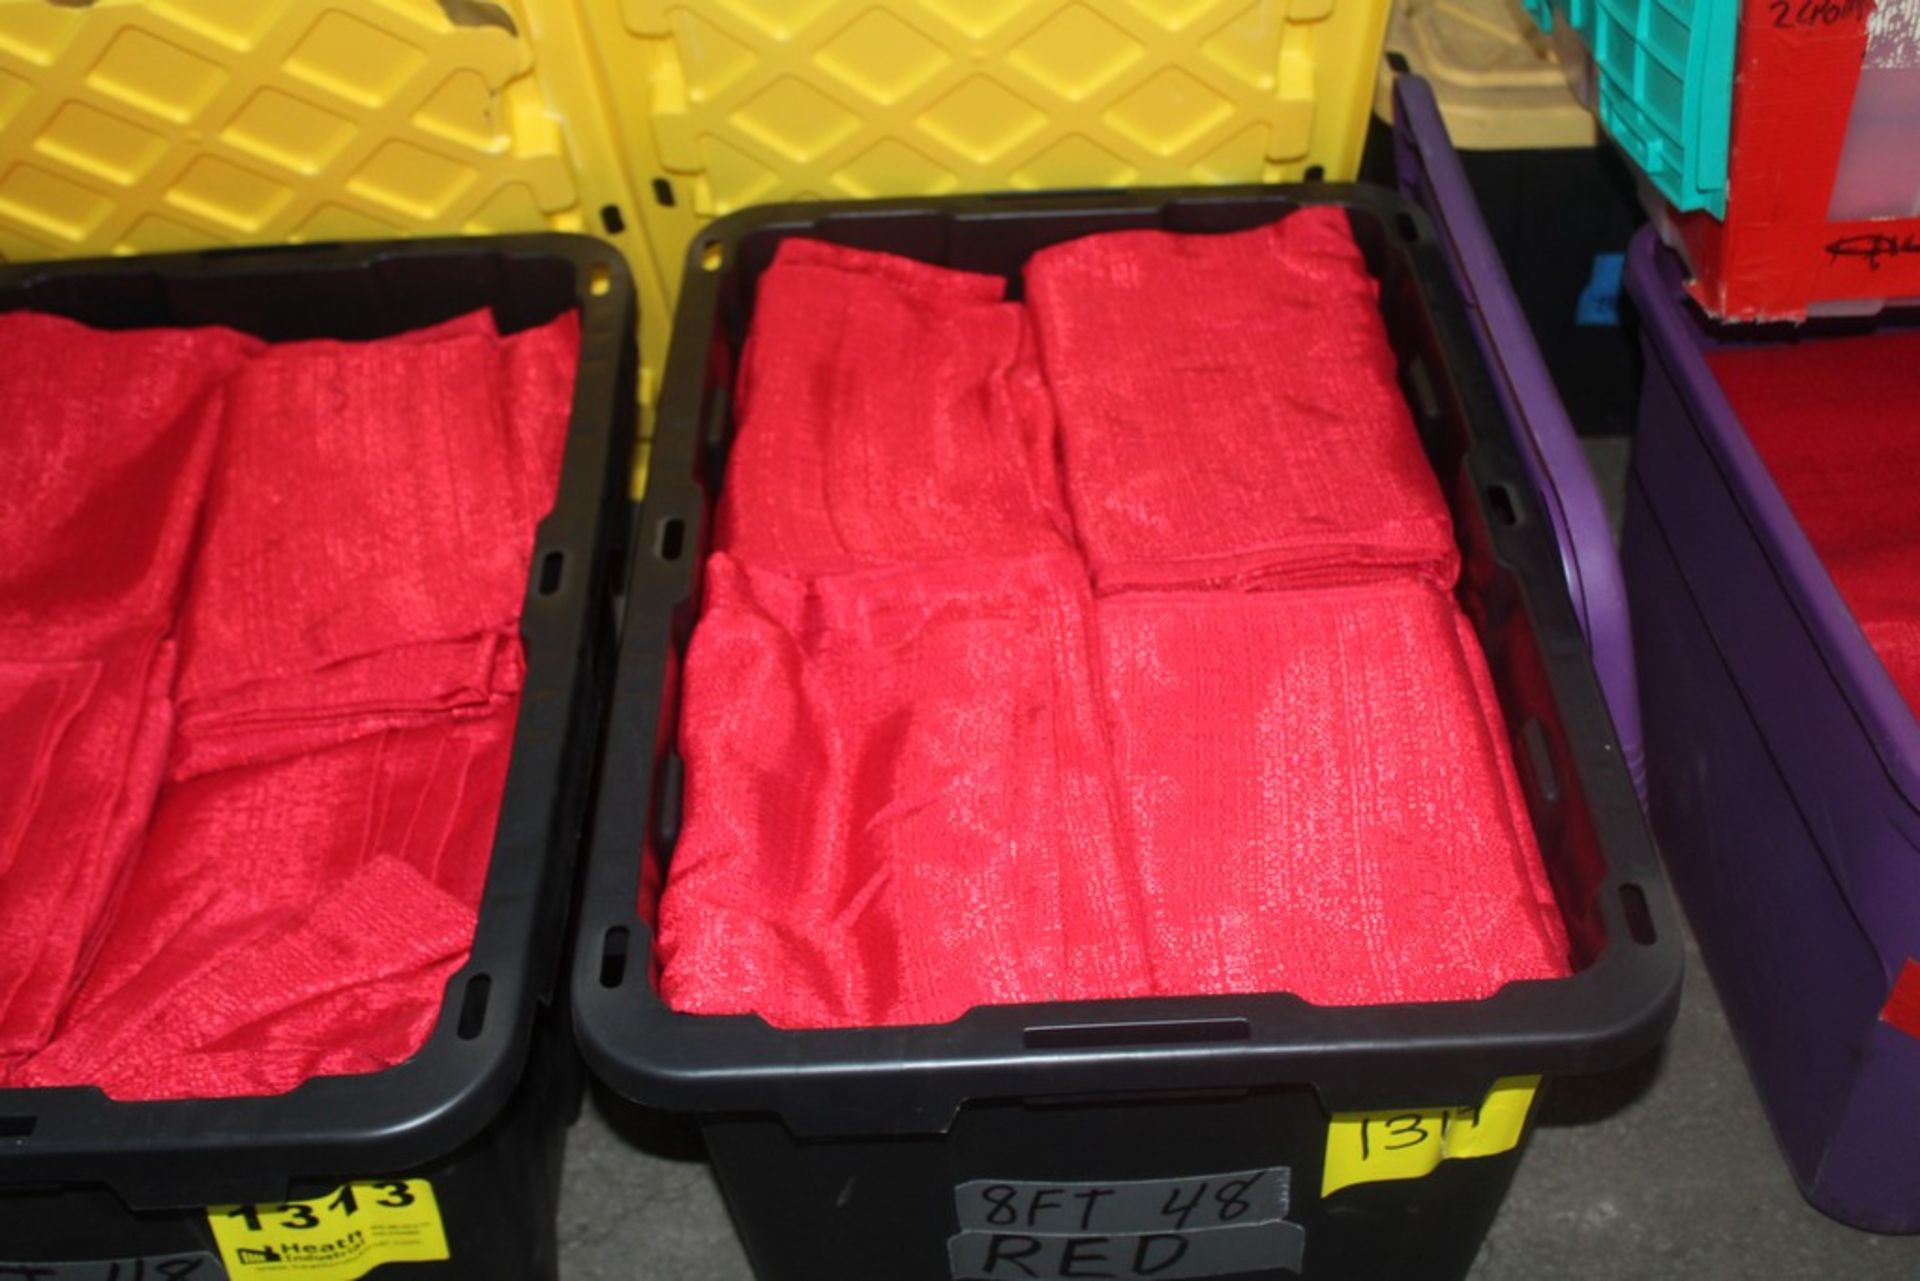 APPROX. (48) 8FT RED DRAPES IN TOTE ( QUANTITIES NOT GUARANTEED)